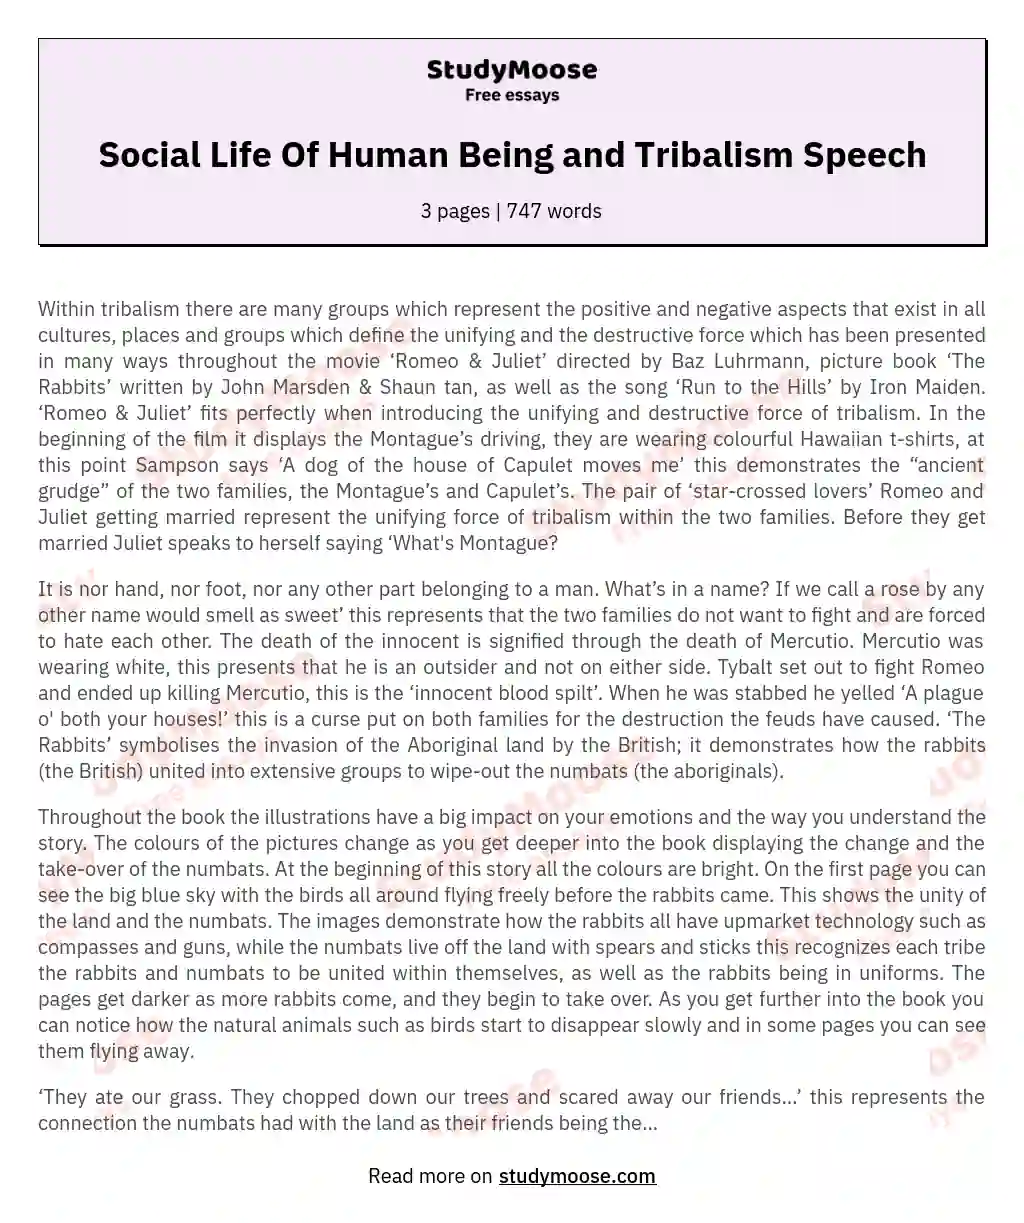 Social Life Of Human Being and Tribalism Speech essay